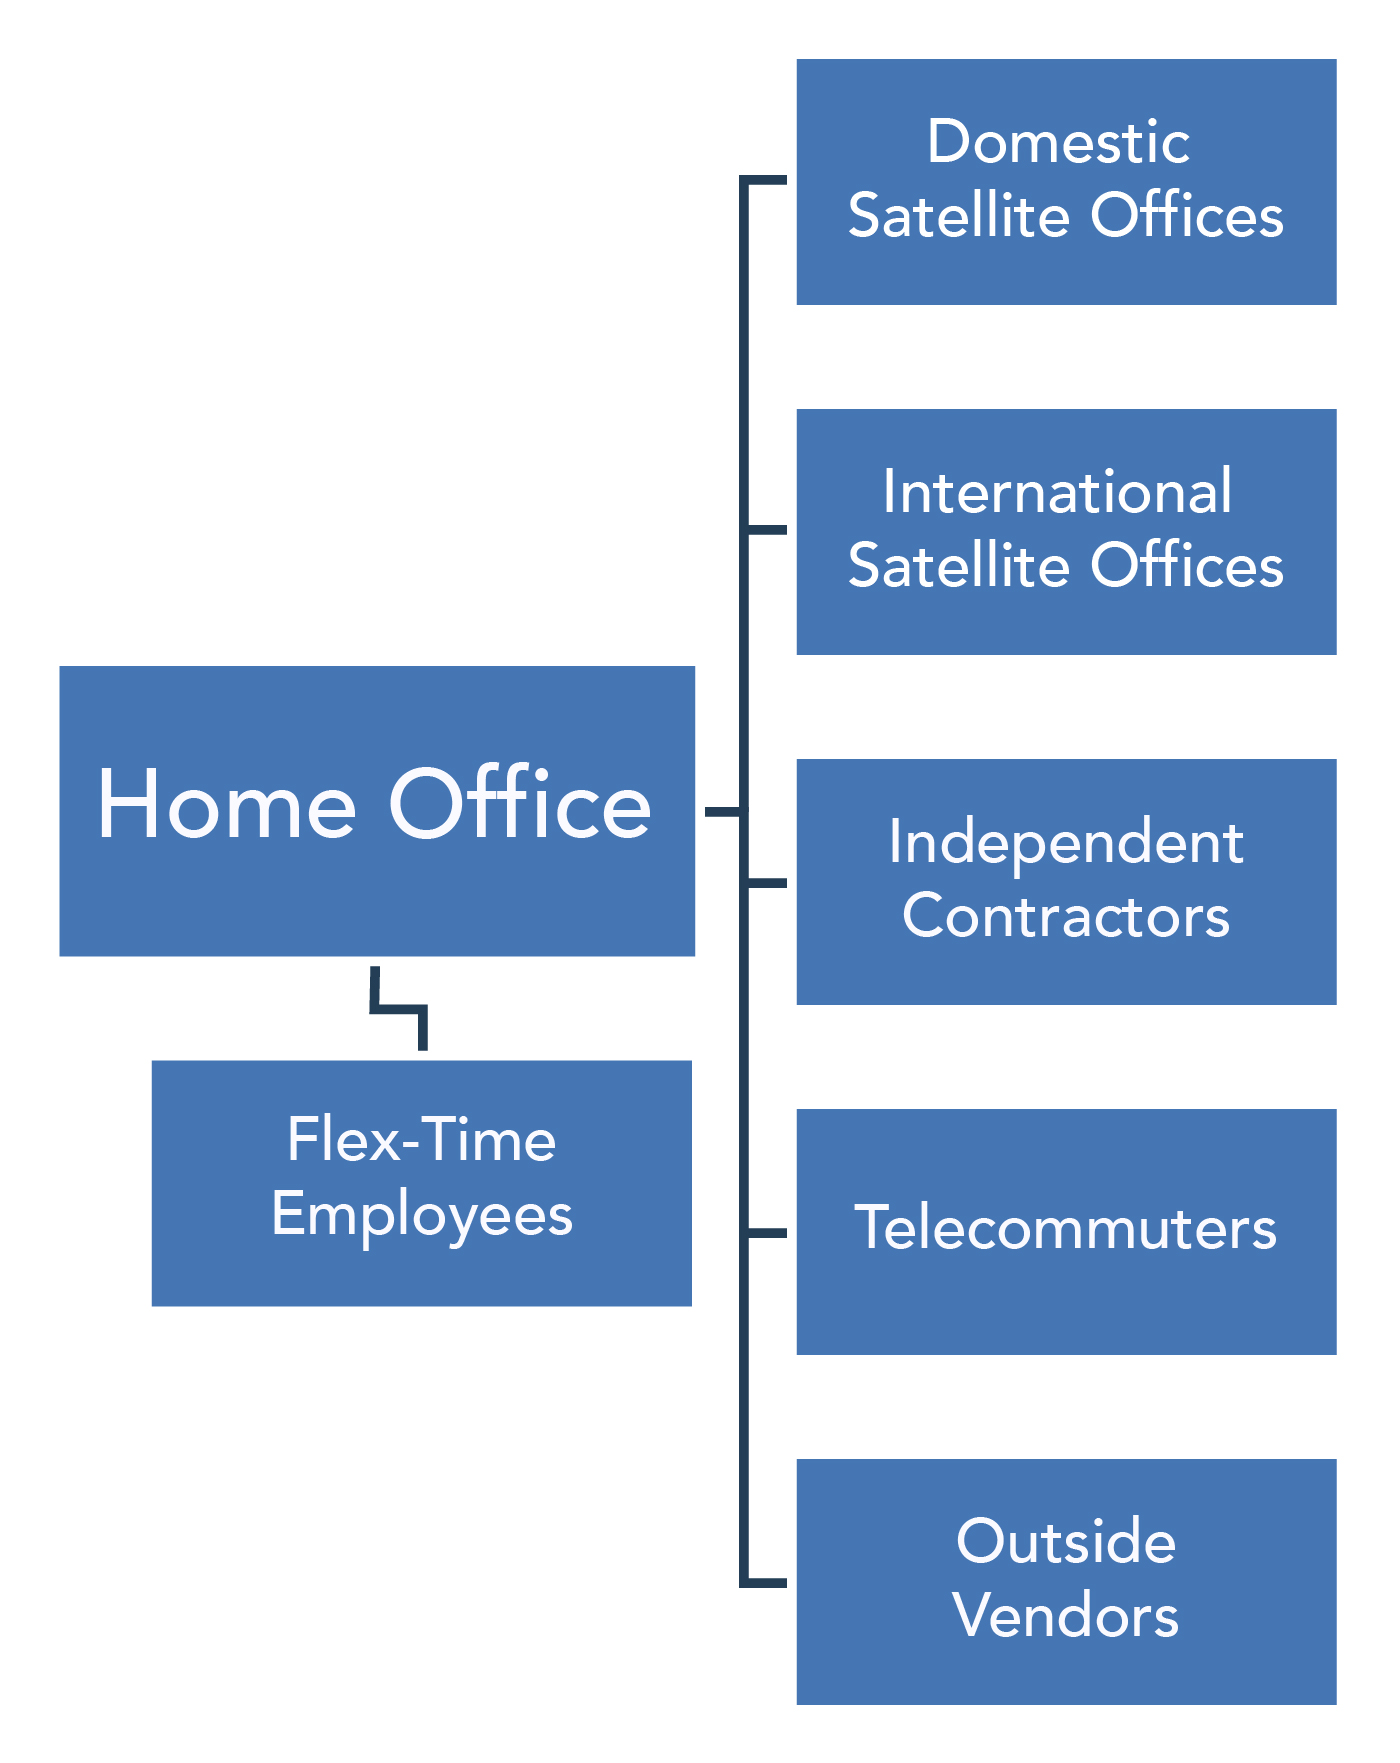 Example of Virtual Organizational Structure. Flex-Time employees work at the home office. The organization also includes five other parties that do not work in the home office: Domestic Satellite Offices, International Satellite Offices, Independent Contractors, Telecommuters, and Outside Vendors.